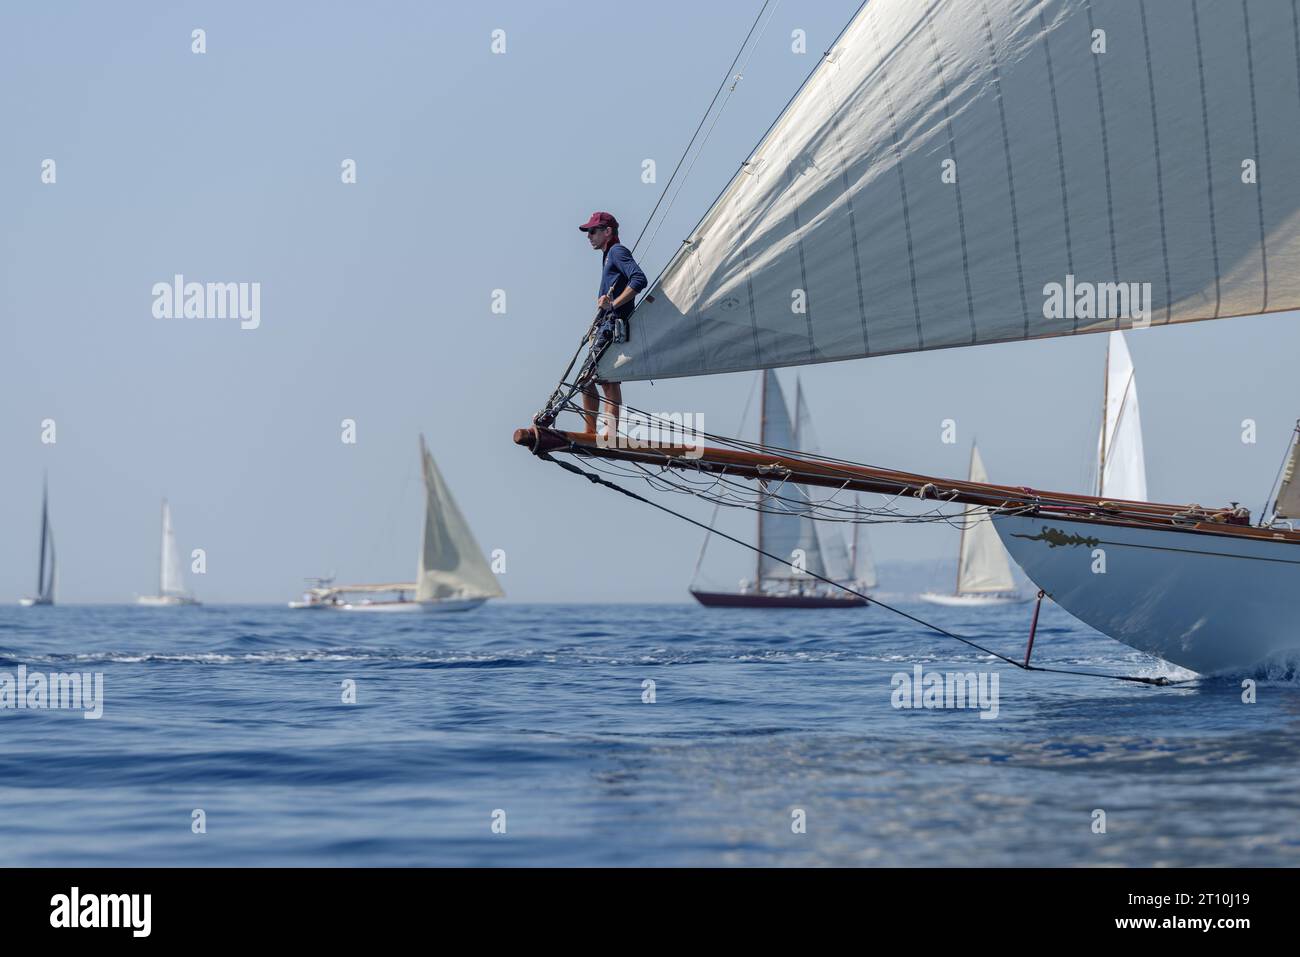 Crew member aboard on sailboat during regatta in Gulf of Imperia, Italy Stock Photo